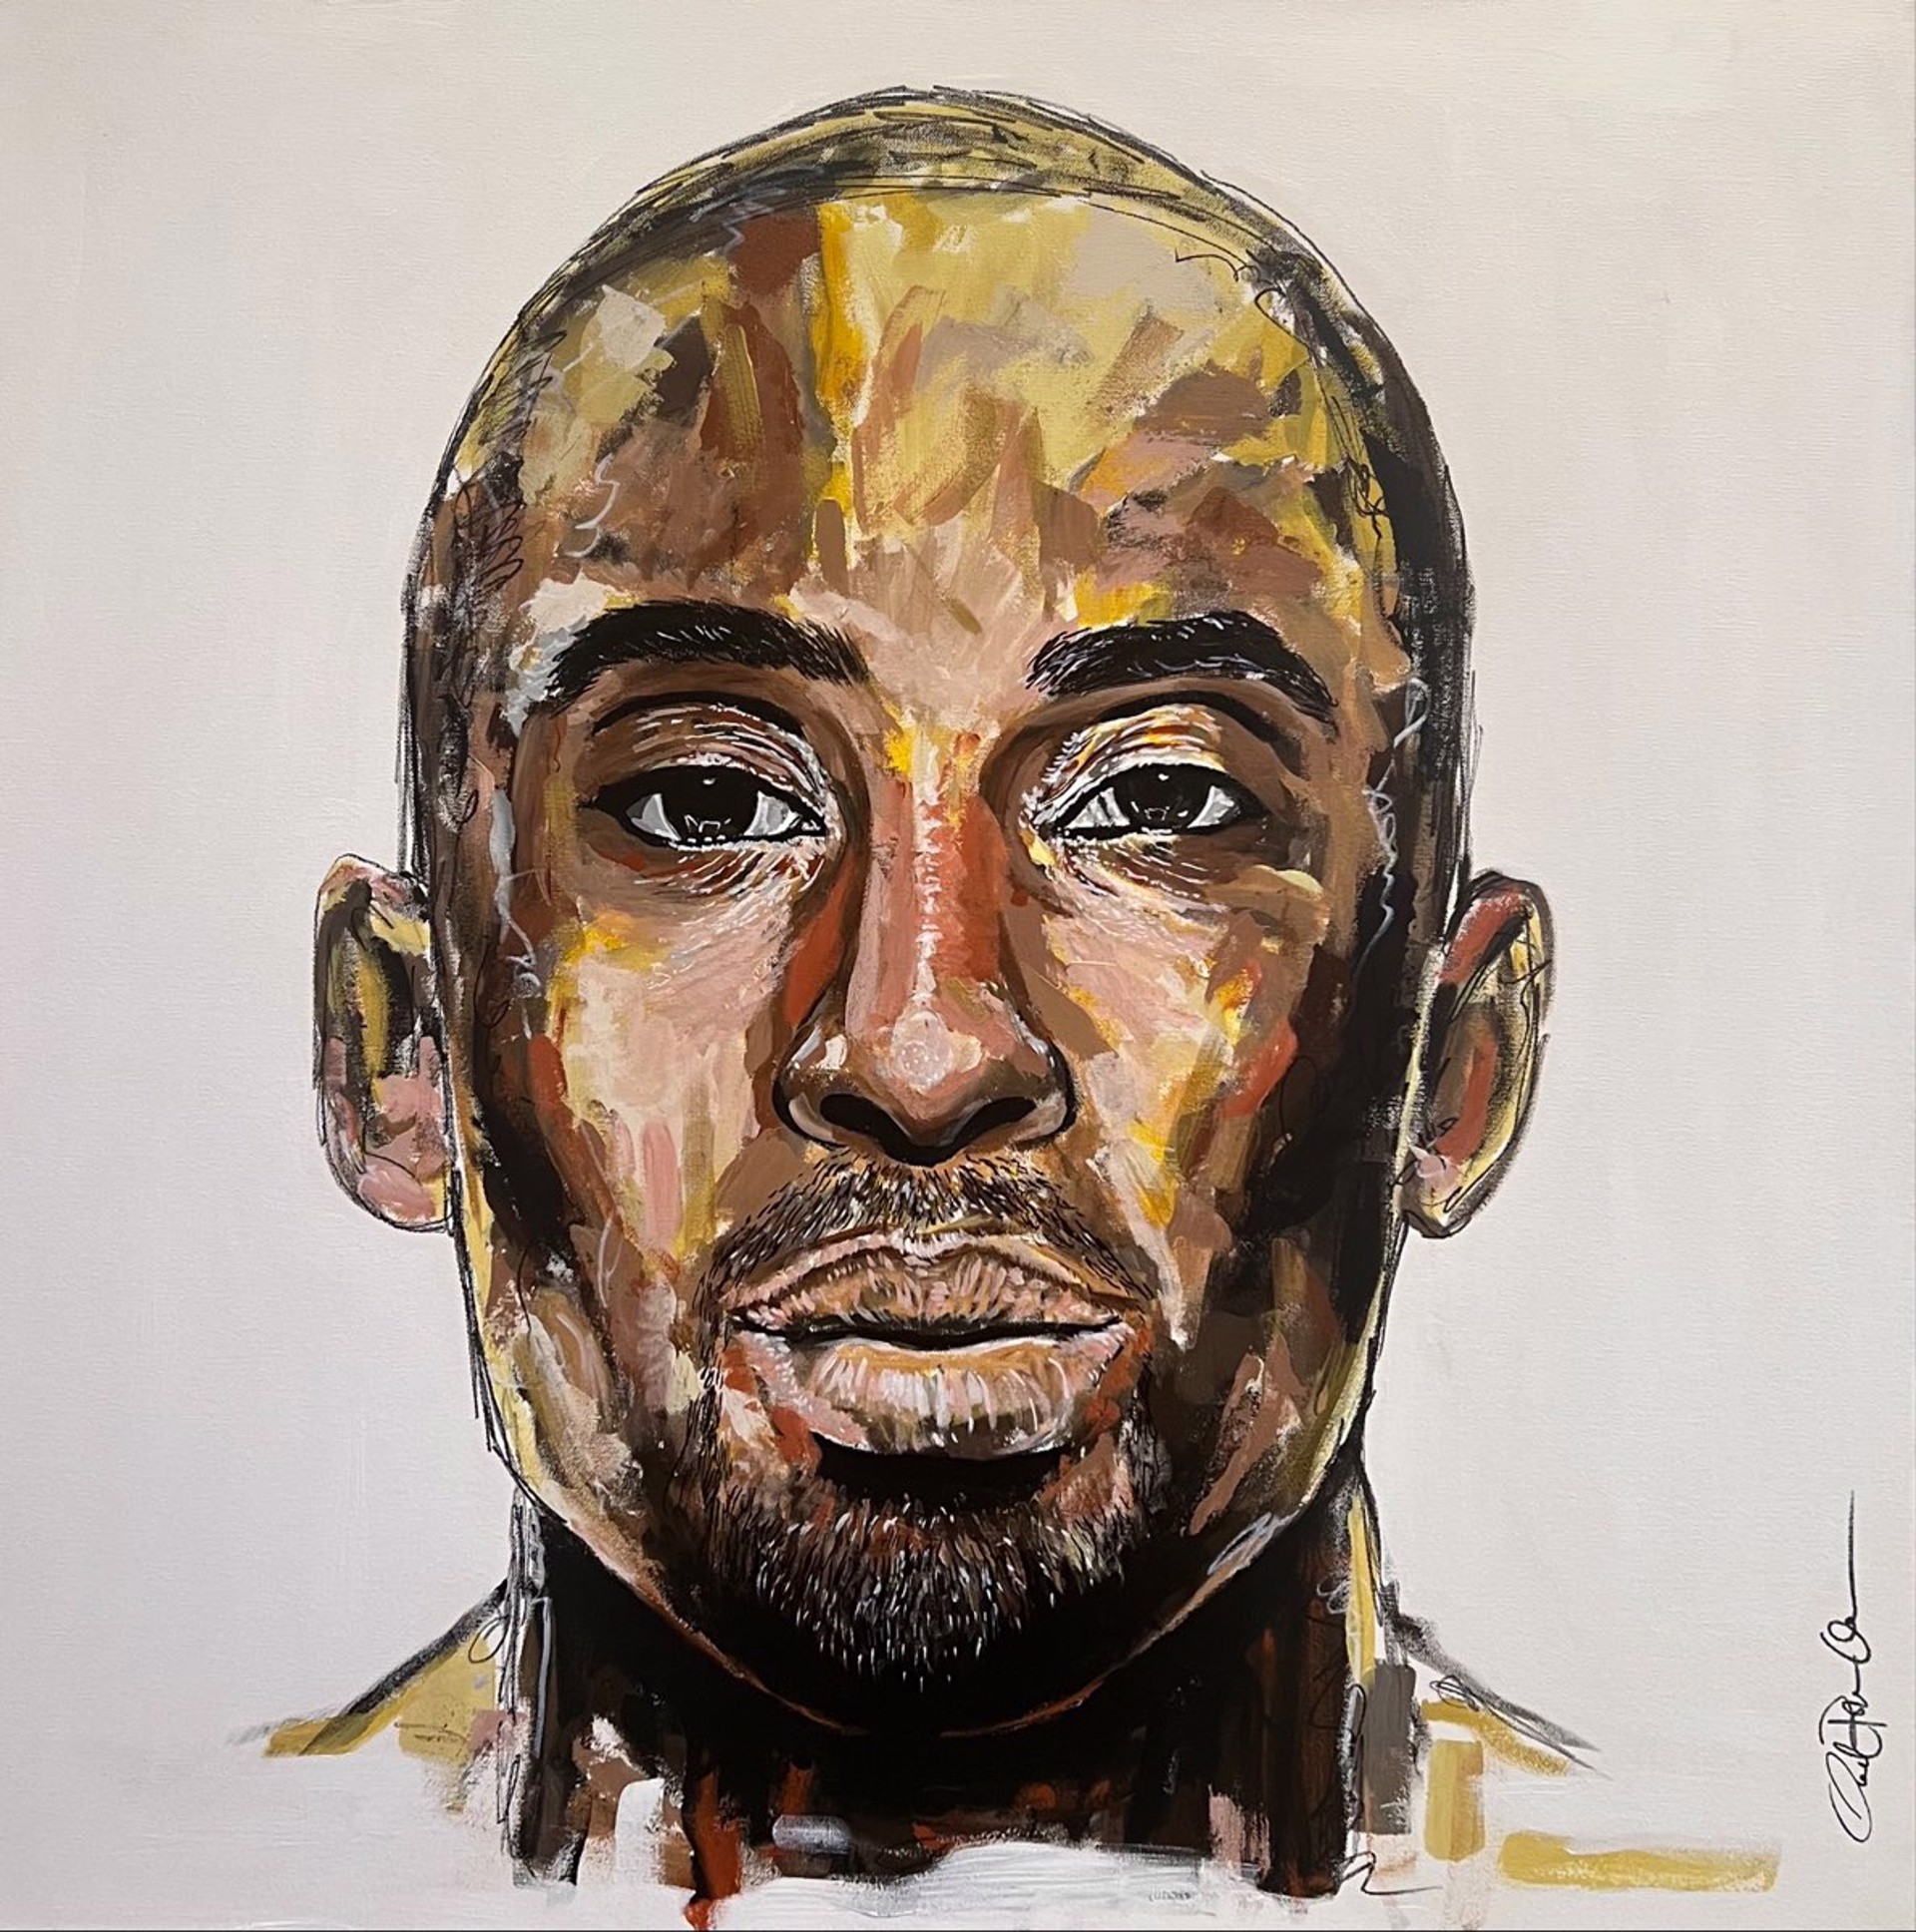 Mamba Forever by Daniel Andreau